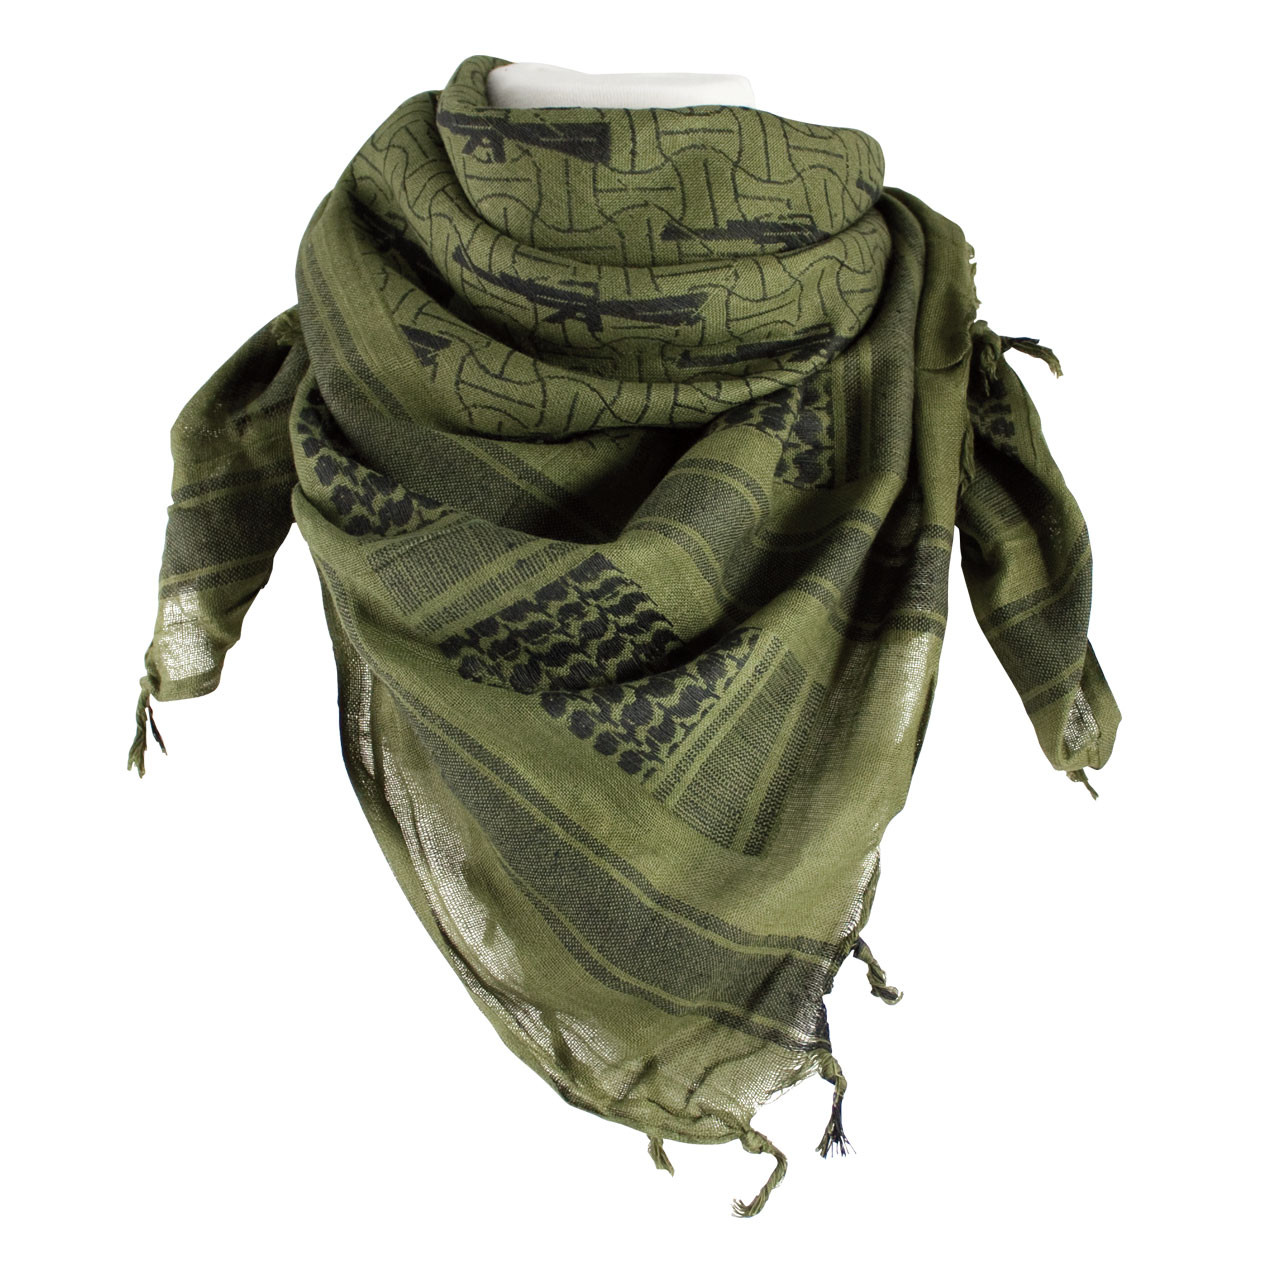 70-15 Tactical Shemagh - Olive Drab & Black: M16 rifle